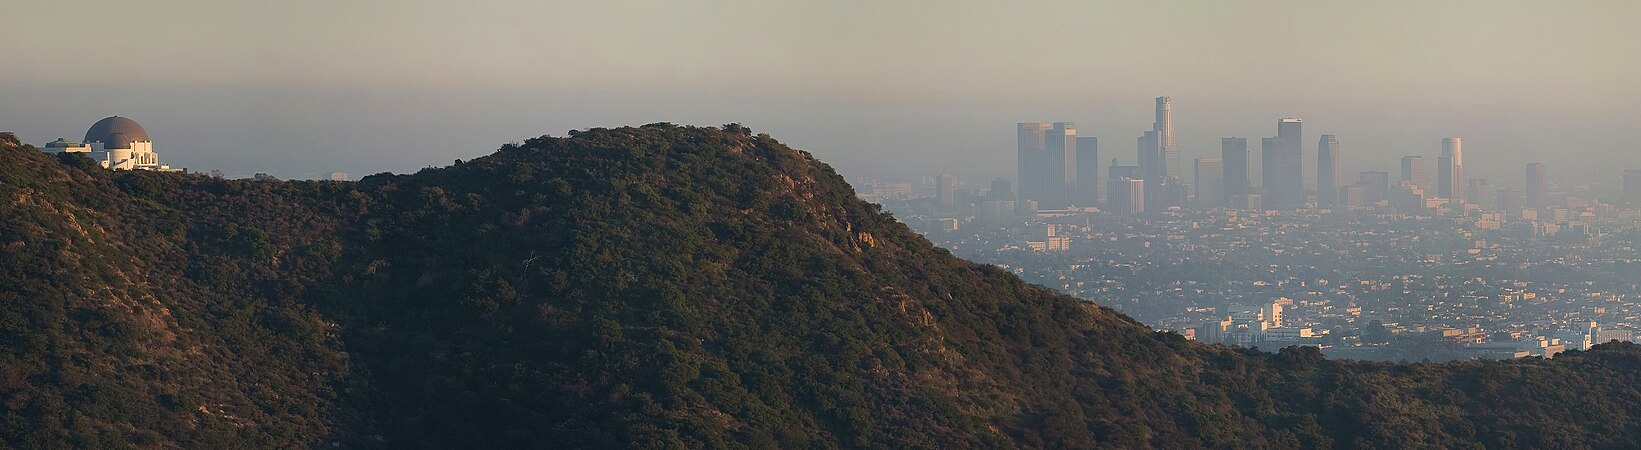 Griffith Observatory and Downtown Los Angeles, by Diliff